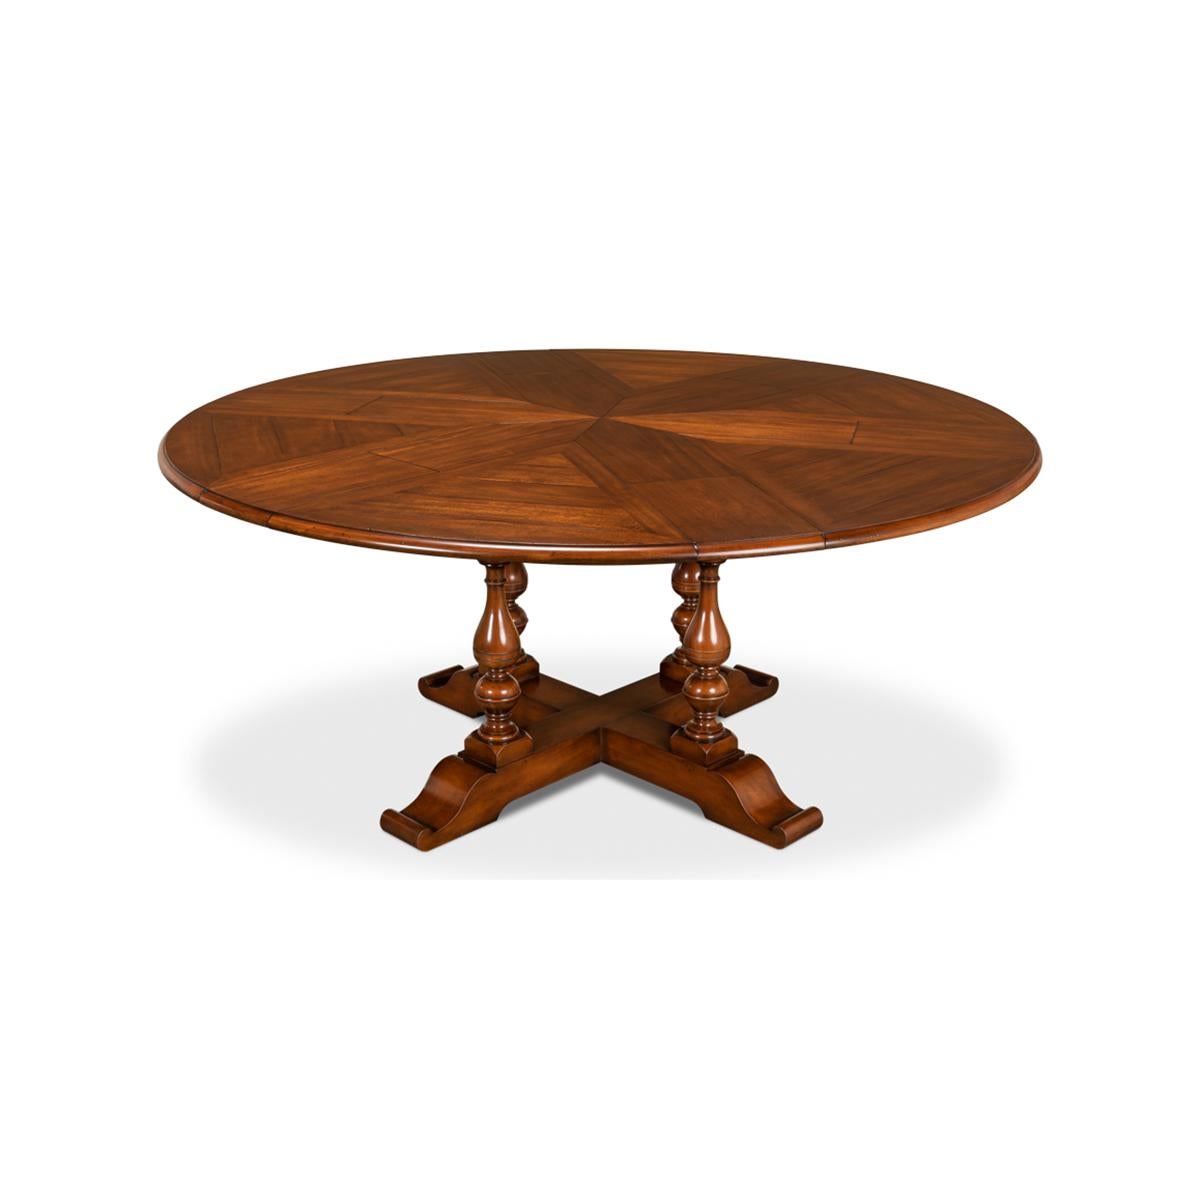 Wood Early English Style Round Extension Dining Table, 70